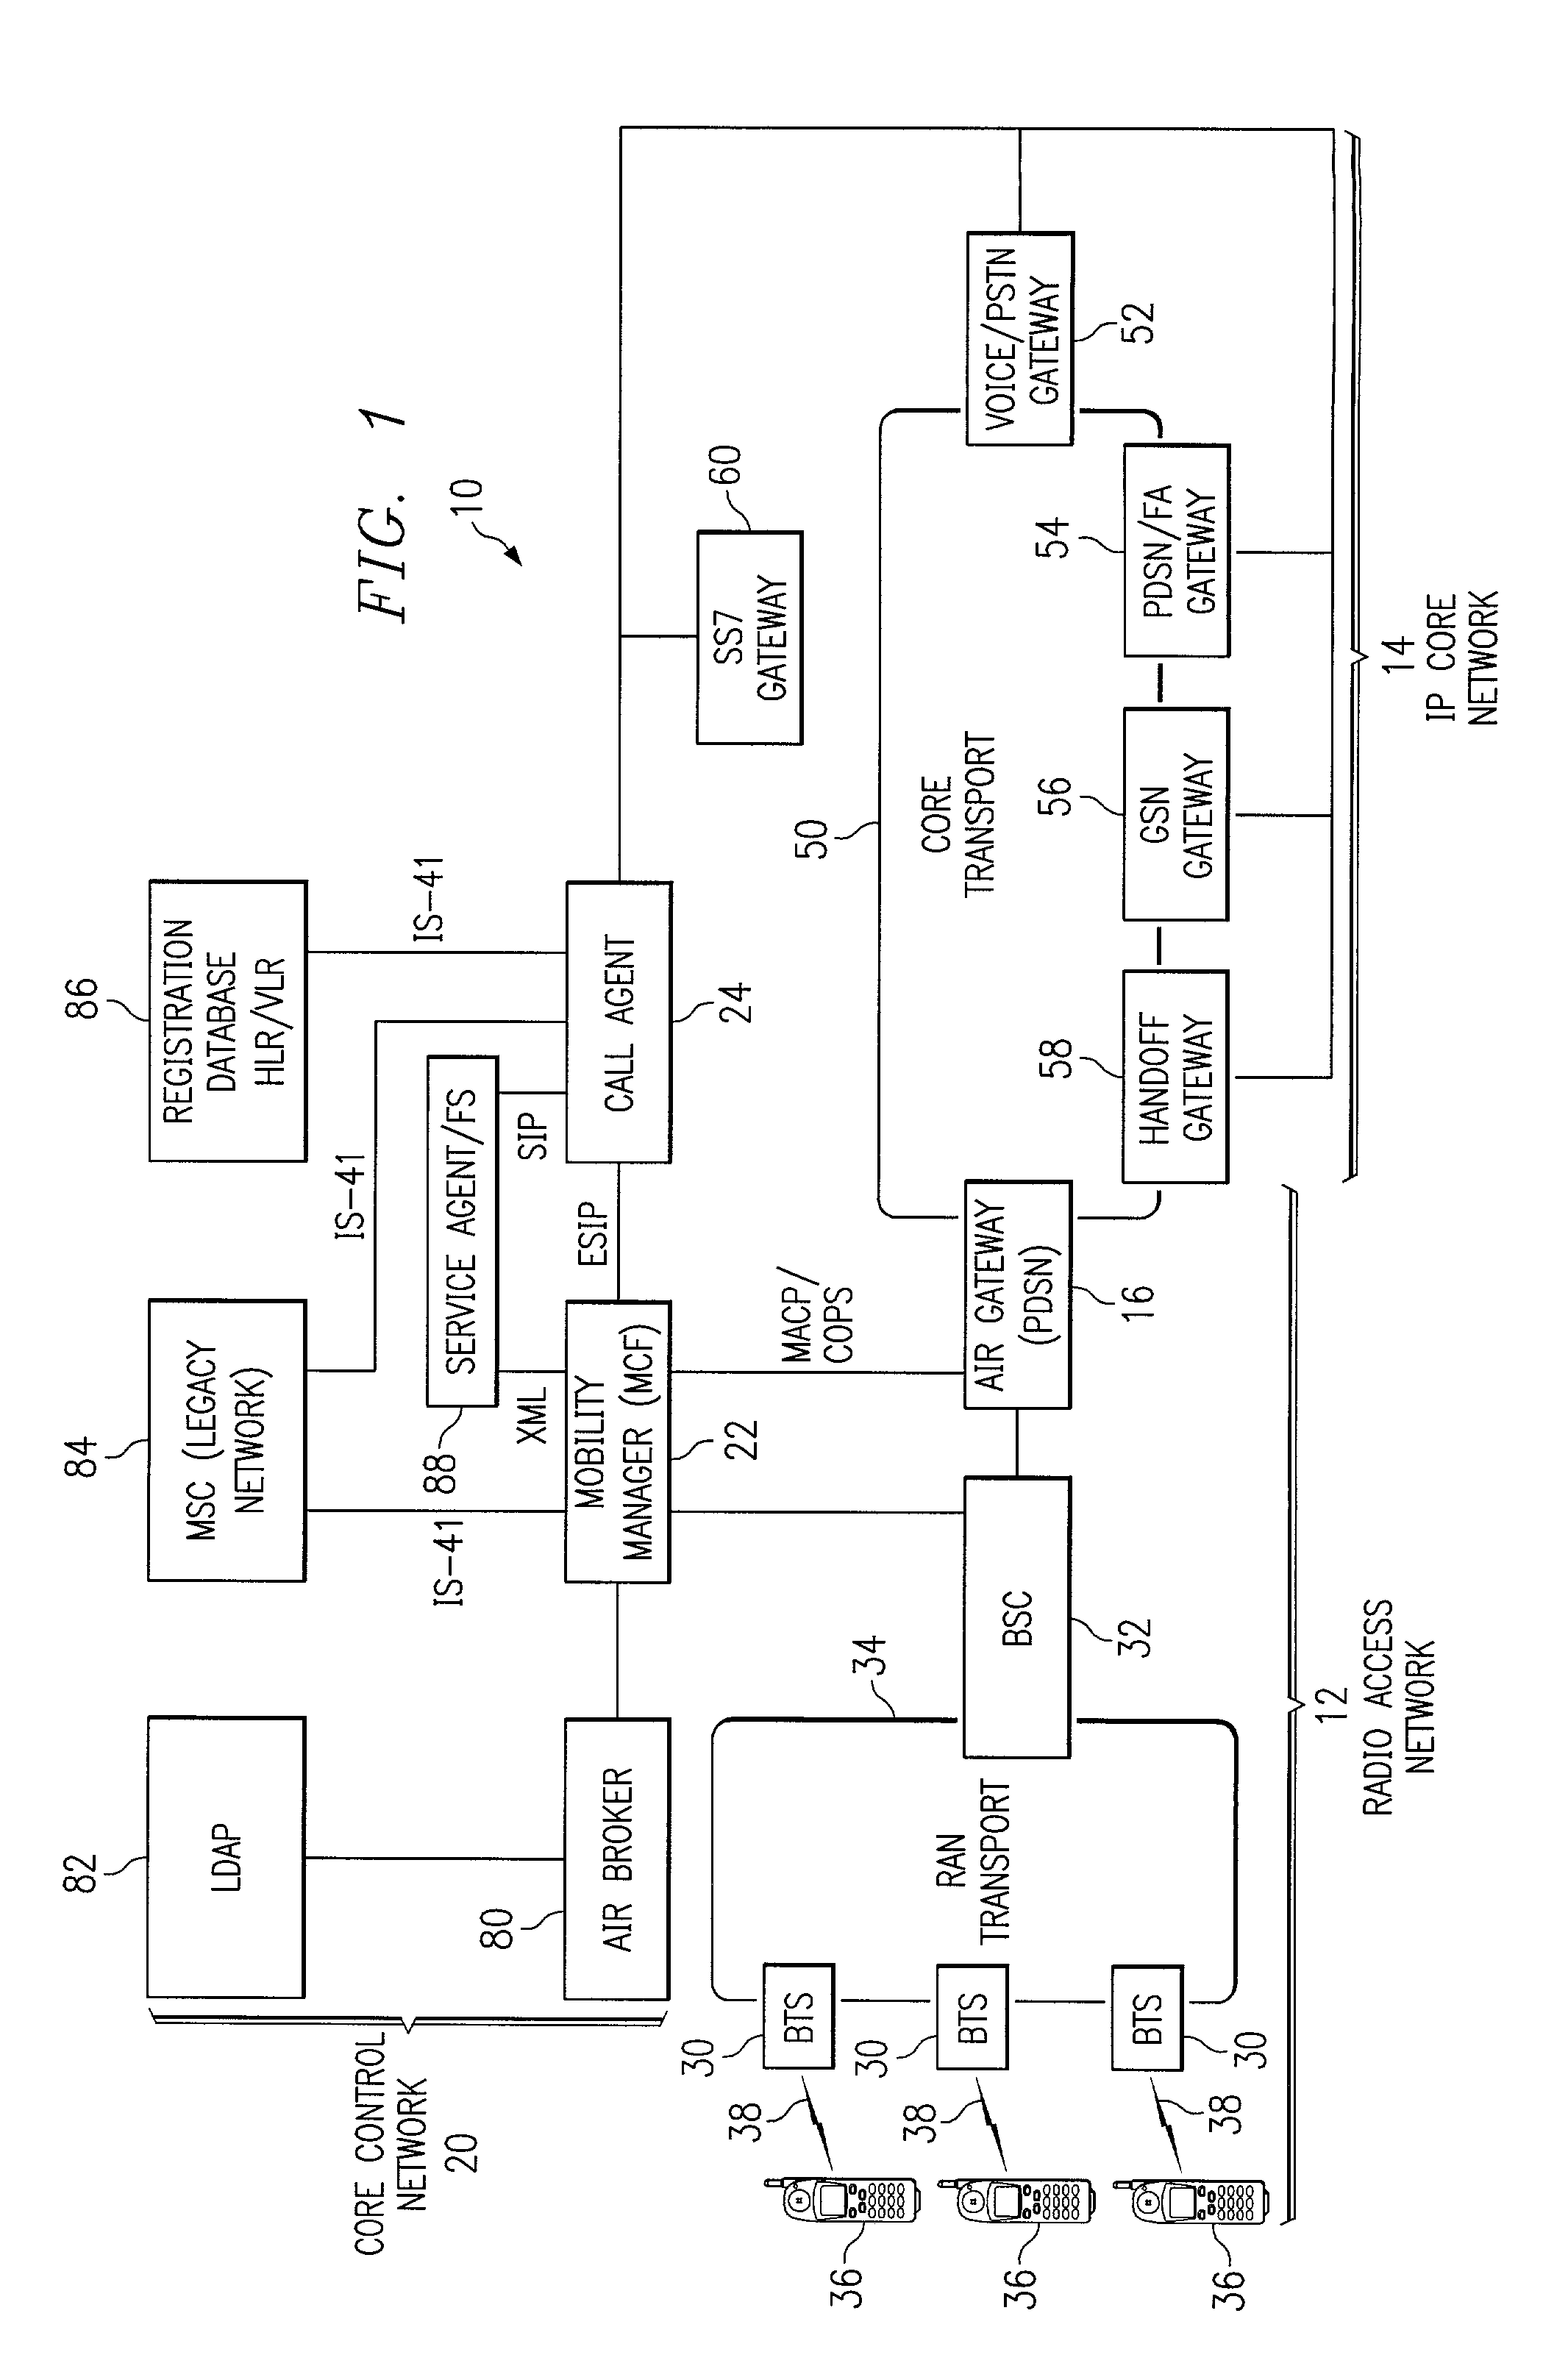 Method and system for providing supplementary services for a wireless access network